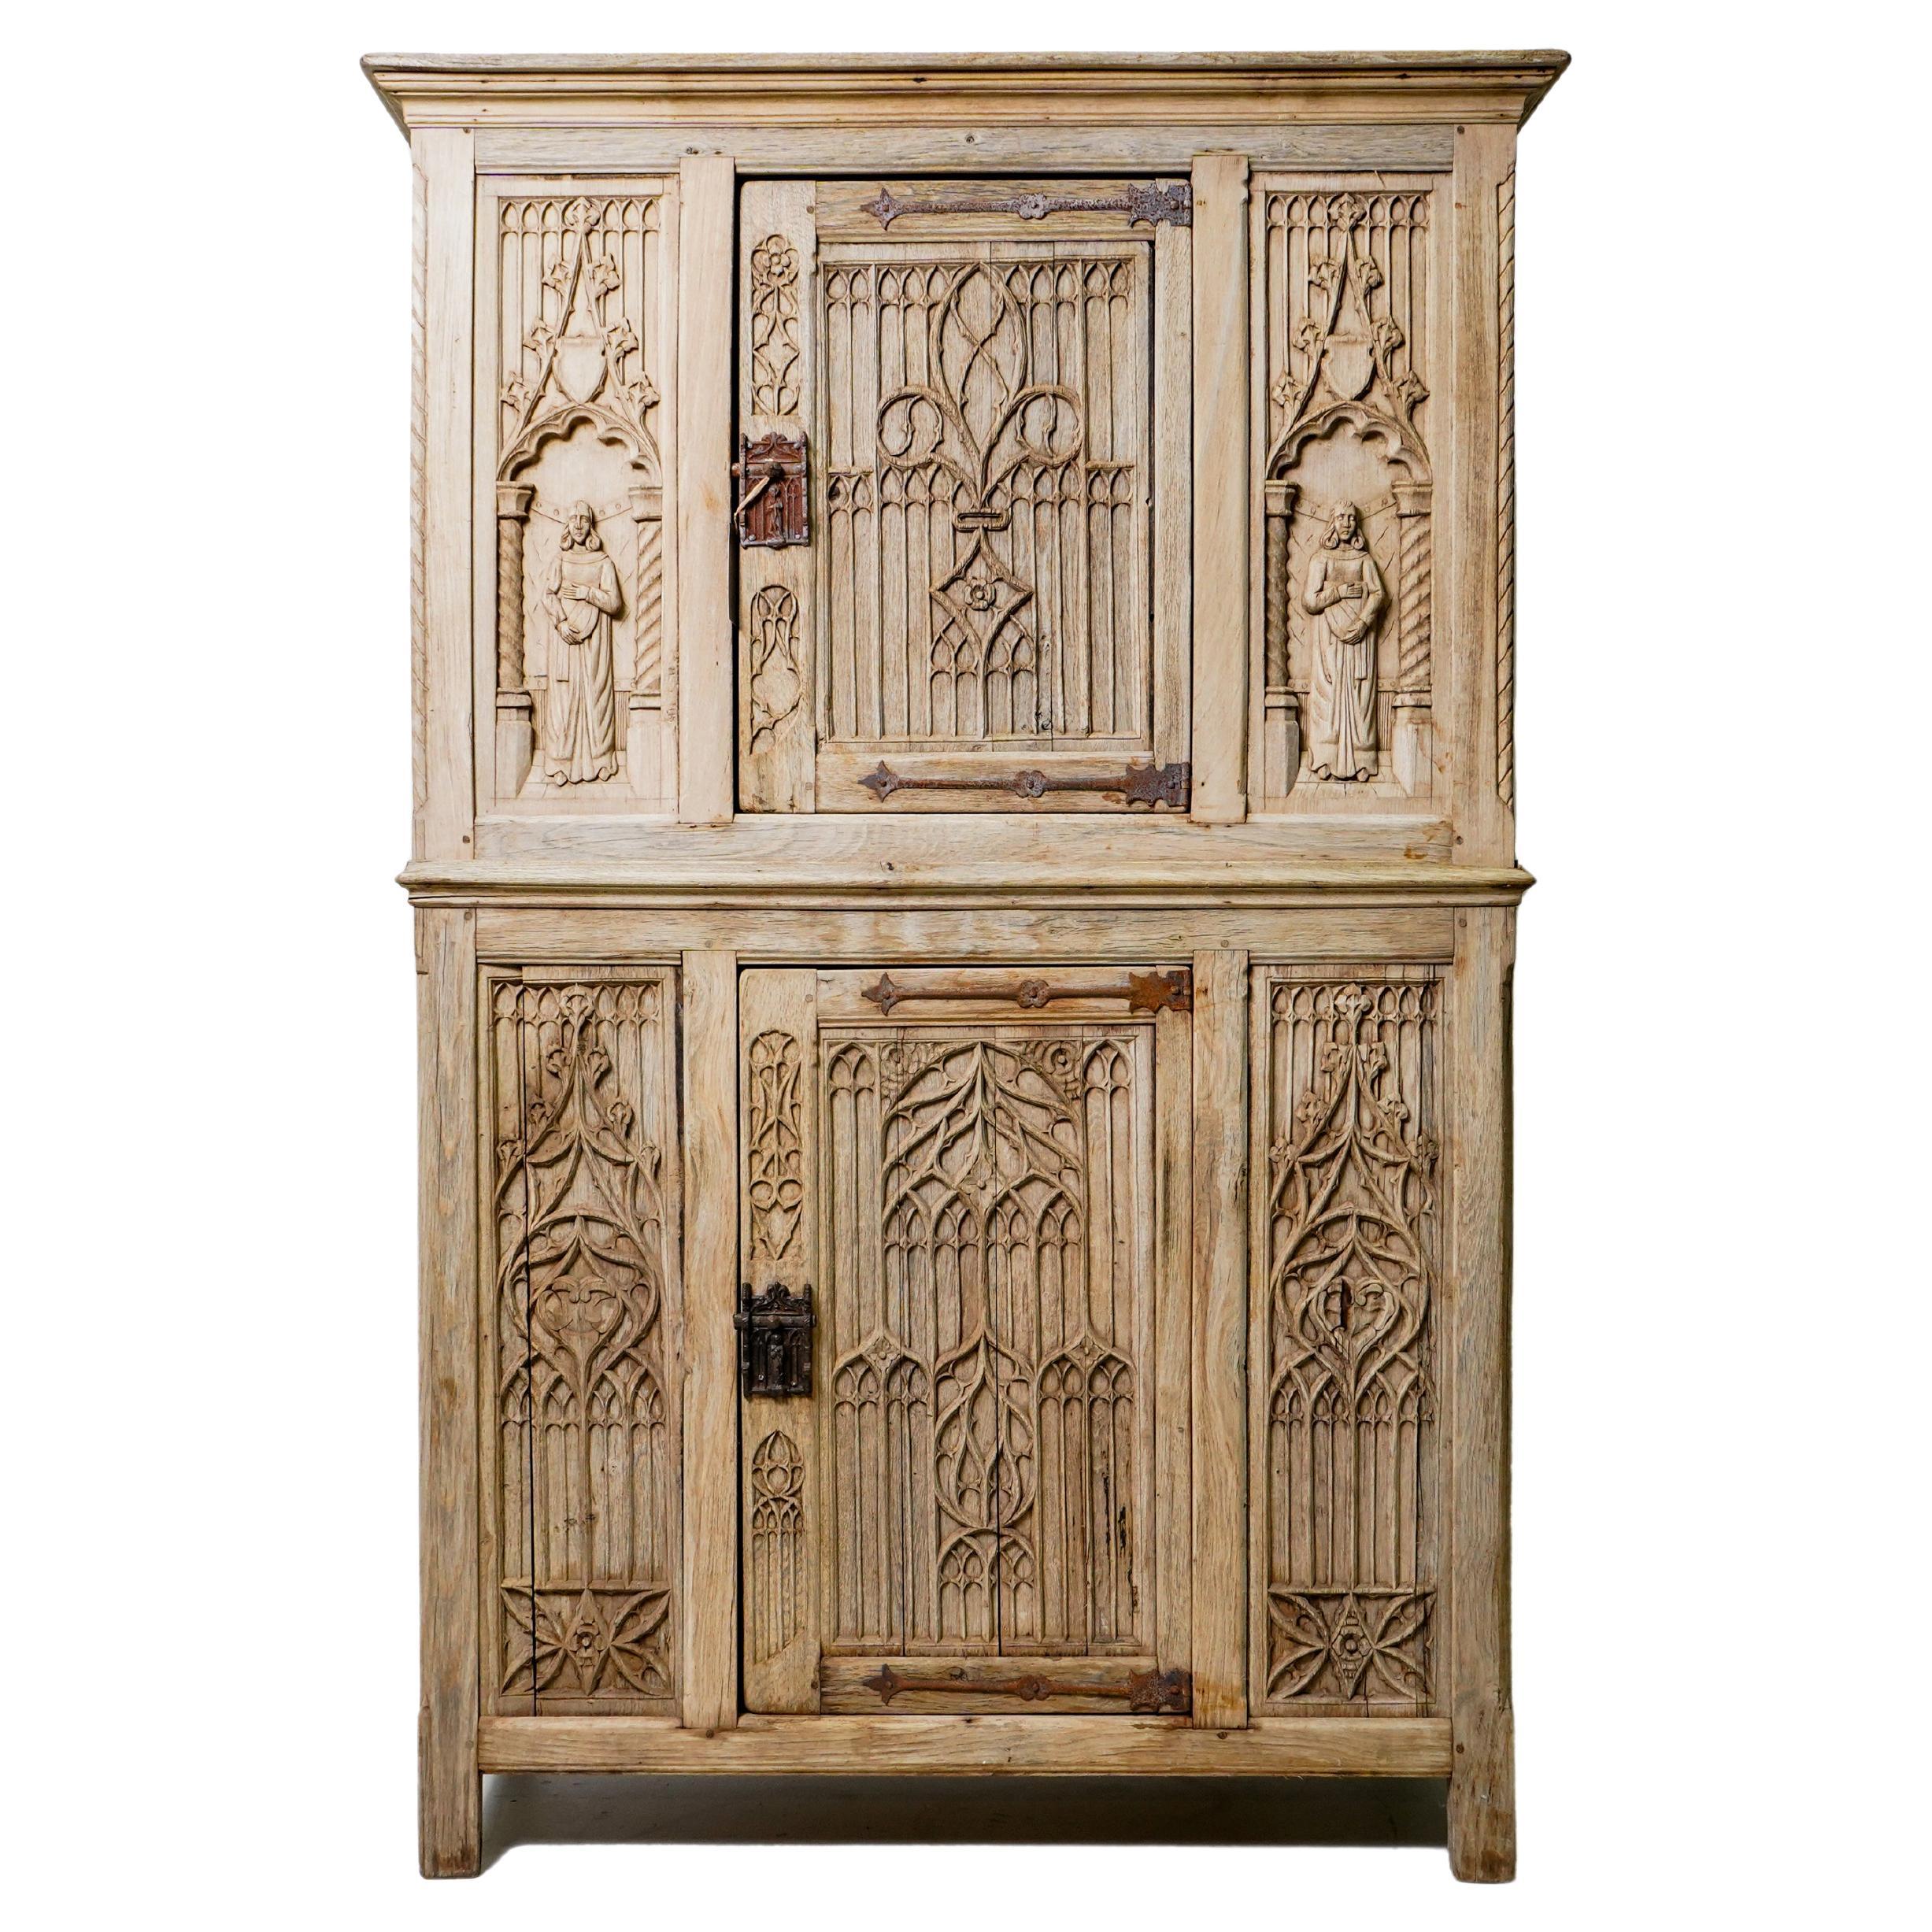 A 19th Century Gothic Revival Cabinet